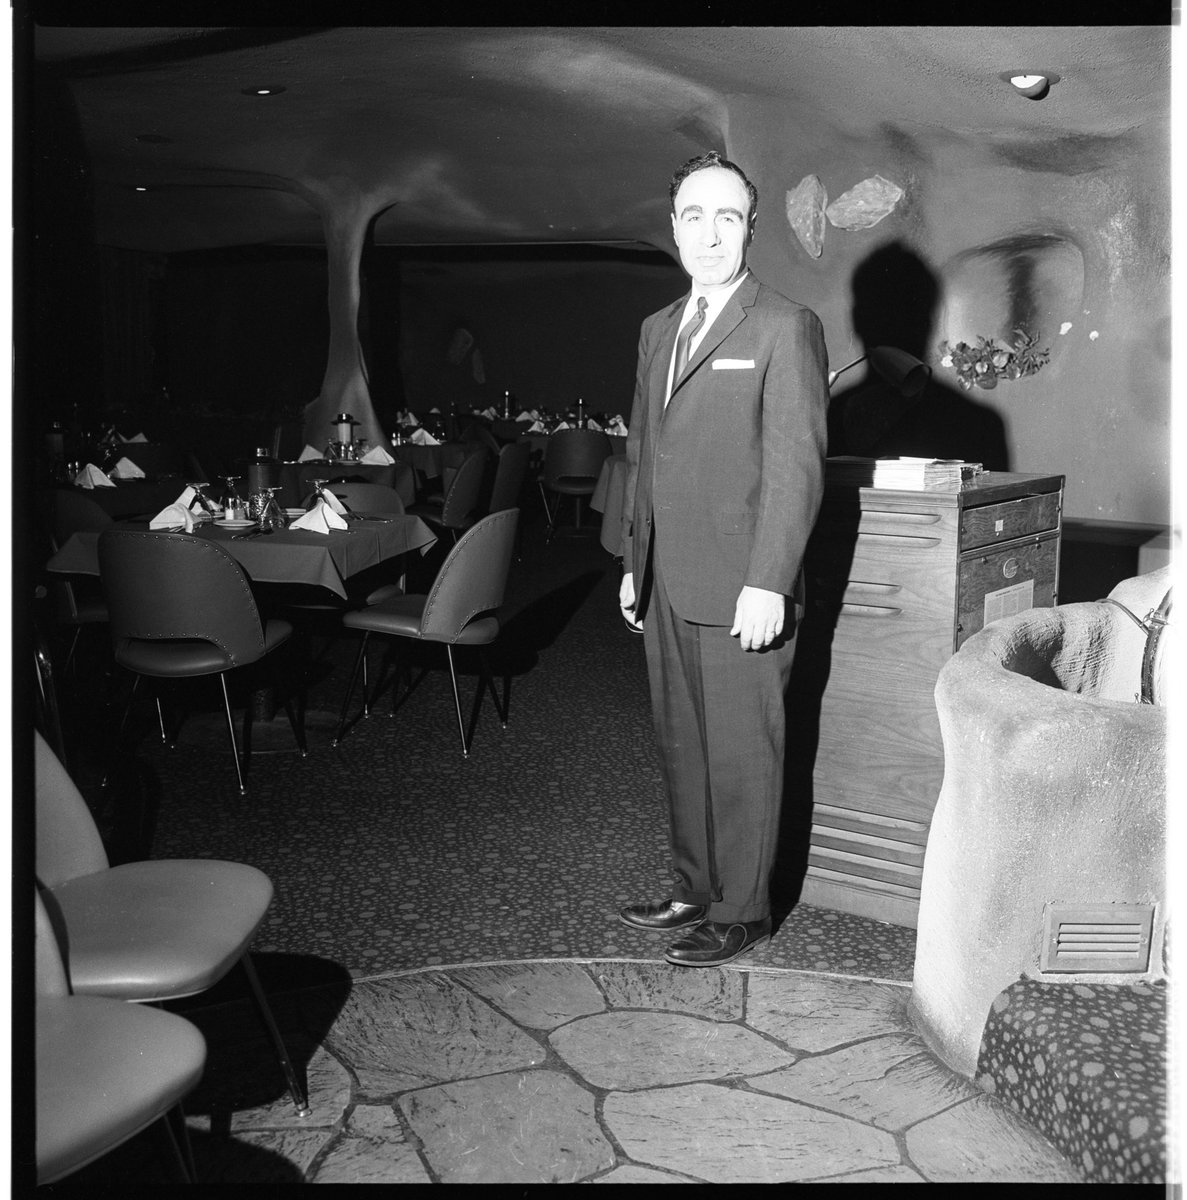 James Livingston, Kales Waterfall Club (1963, demolished 2005) /// The Waterfall Club was a high-end supper club set in a manufactured “cave.” The club was the brainchild of Livingston and local restauranteur Jimmie Kales.